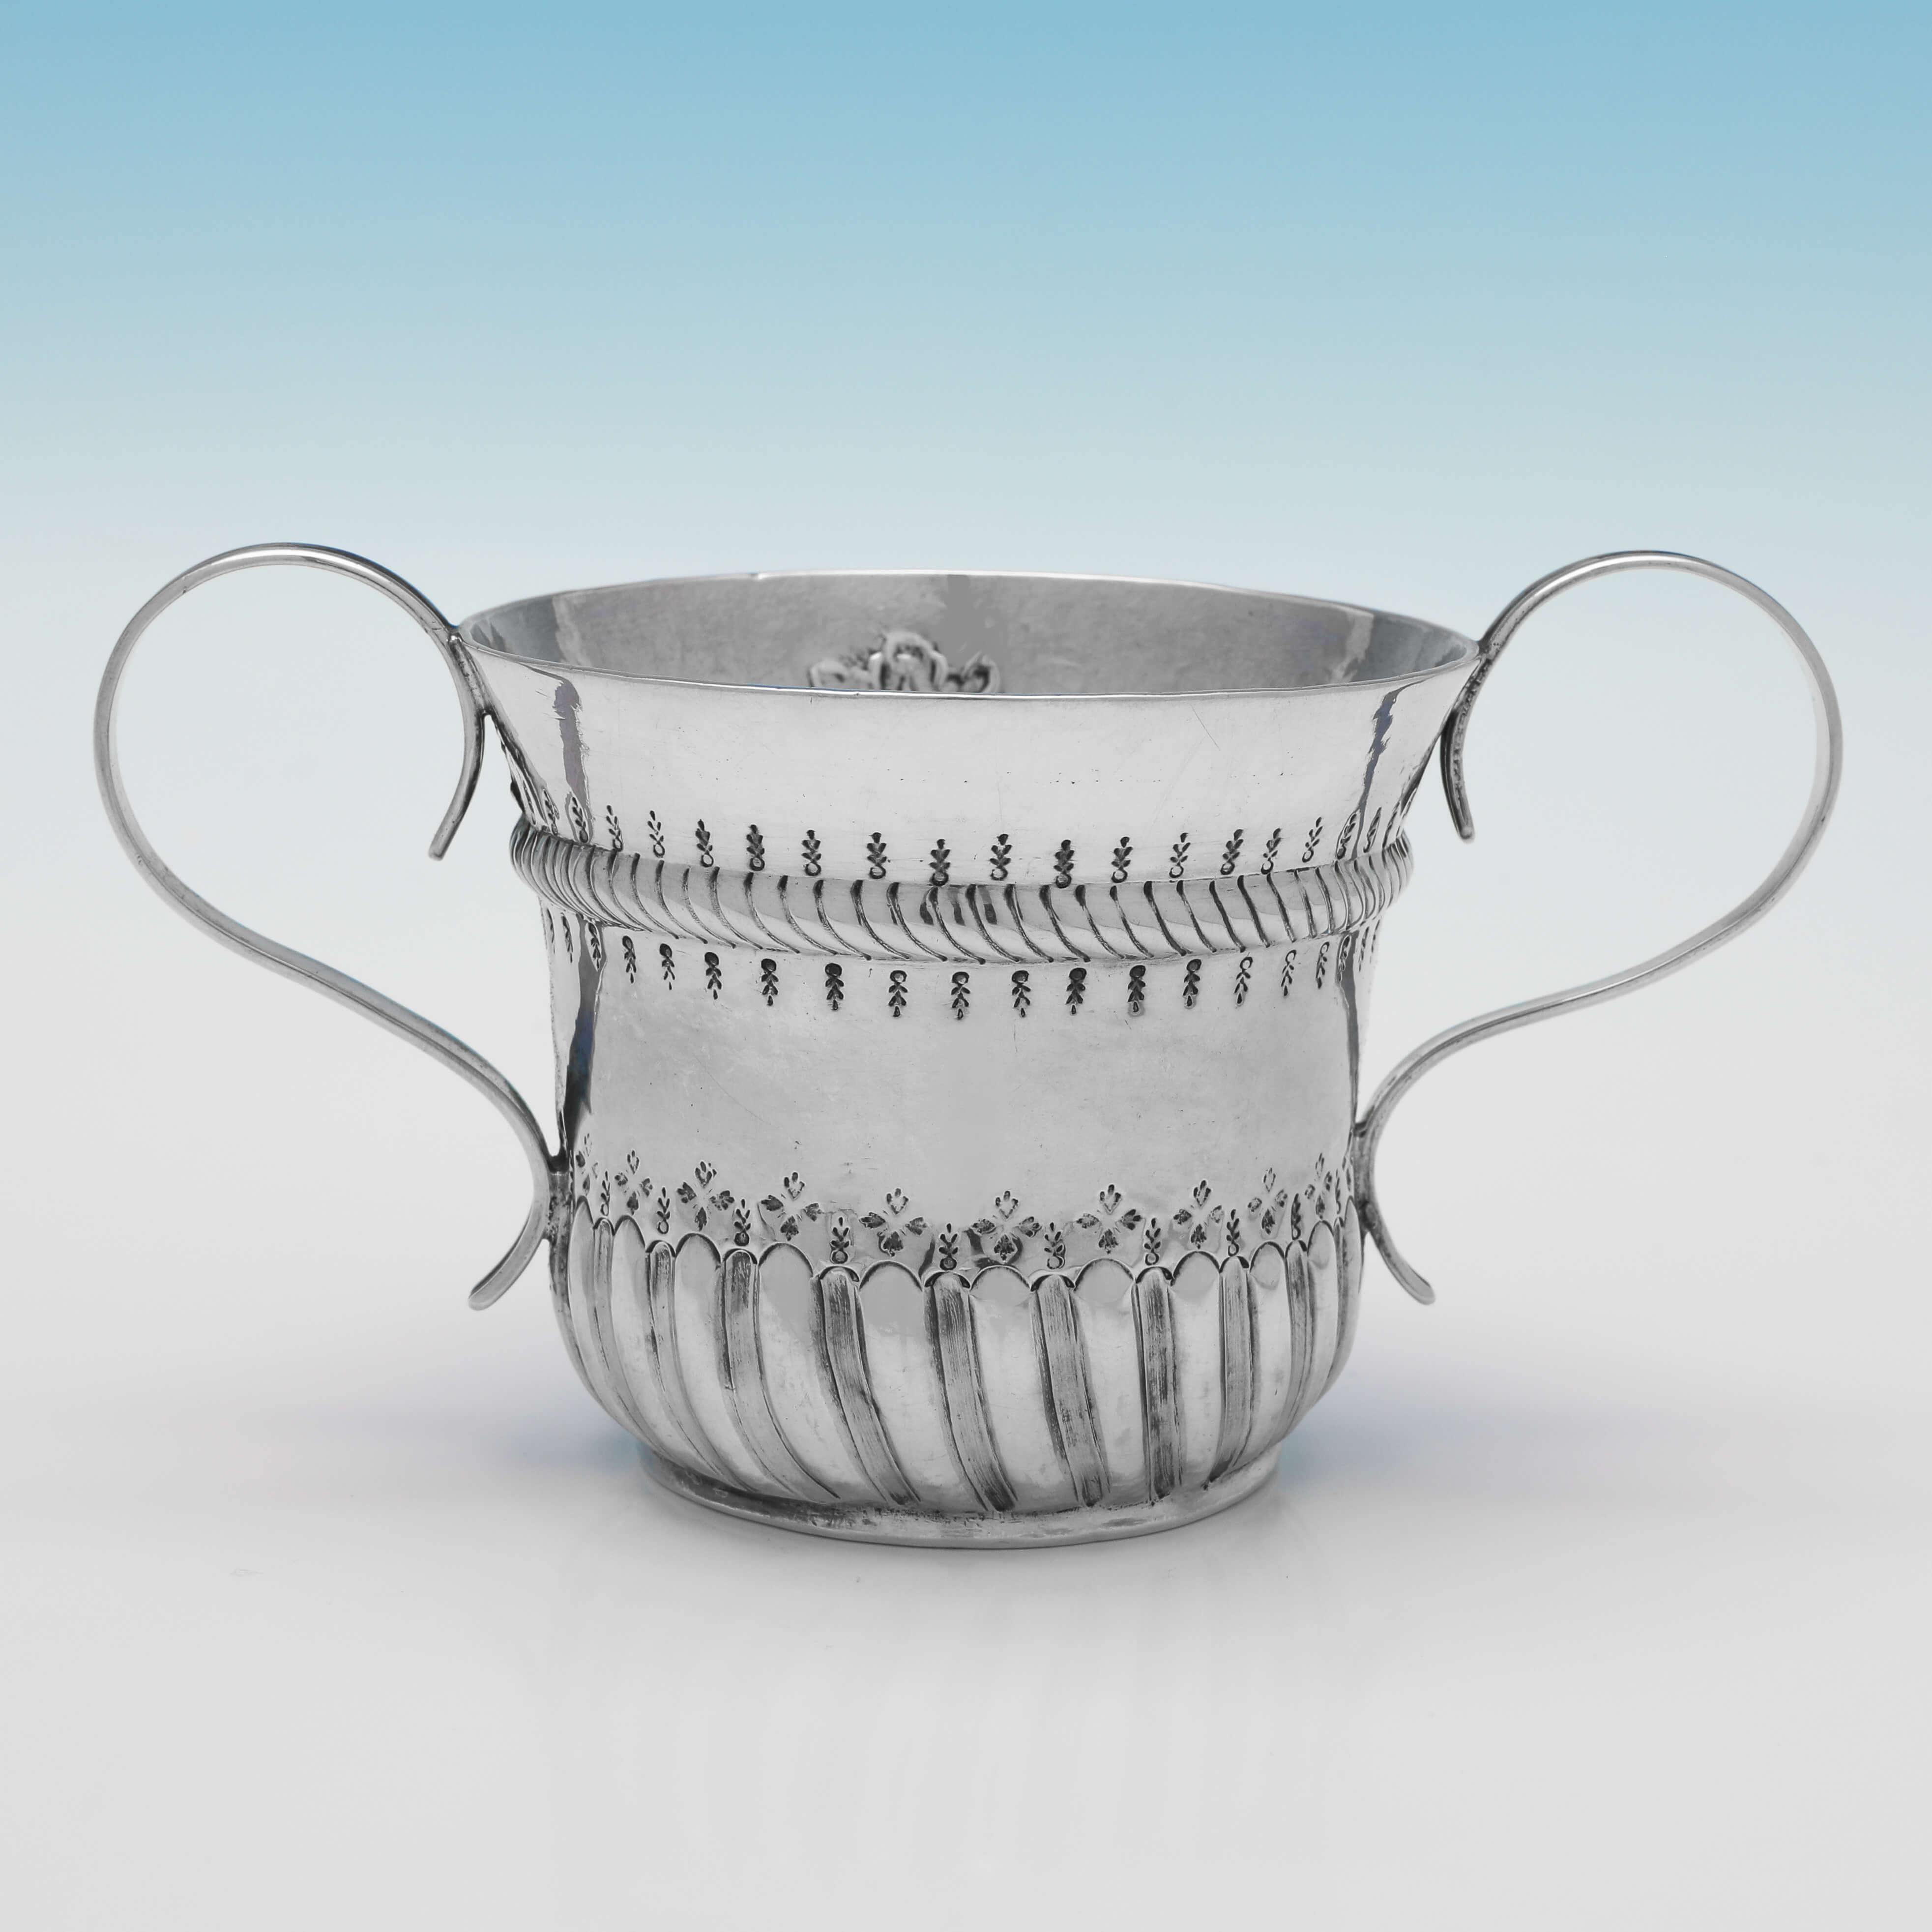 Hallmarked in London in 1733 by Gabriel Sleath, this attractive, George II, Antique Sterling Silver Porringer, is of traditional form and design. The porringer measures 3.25